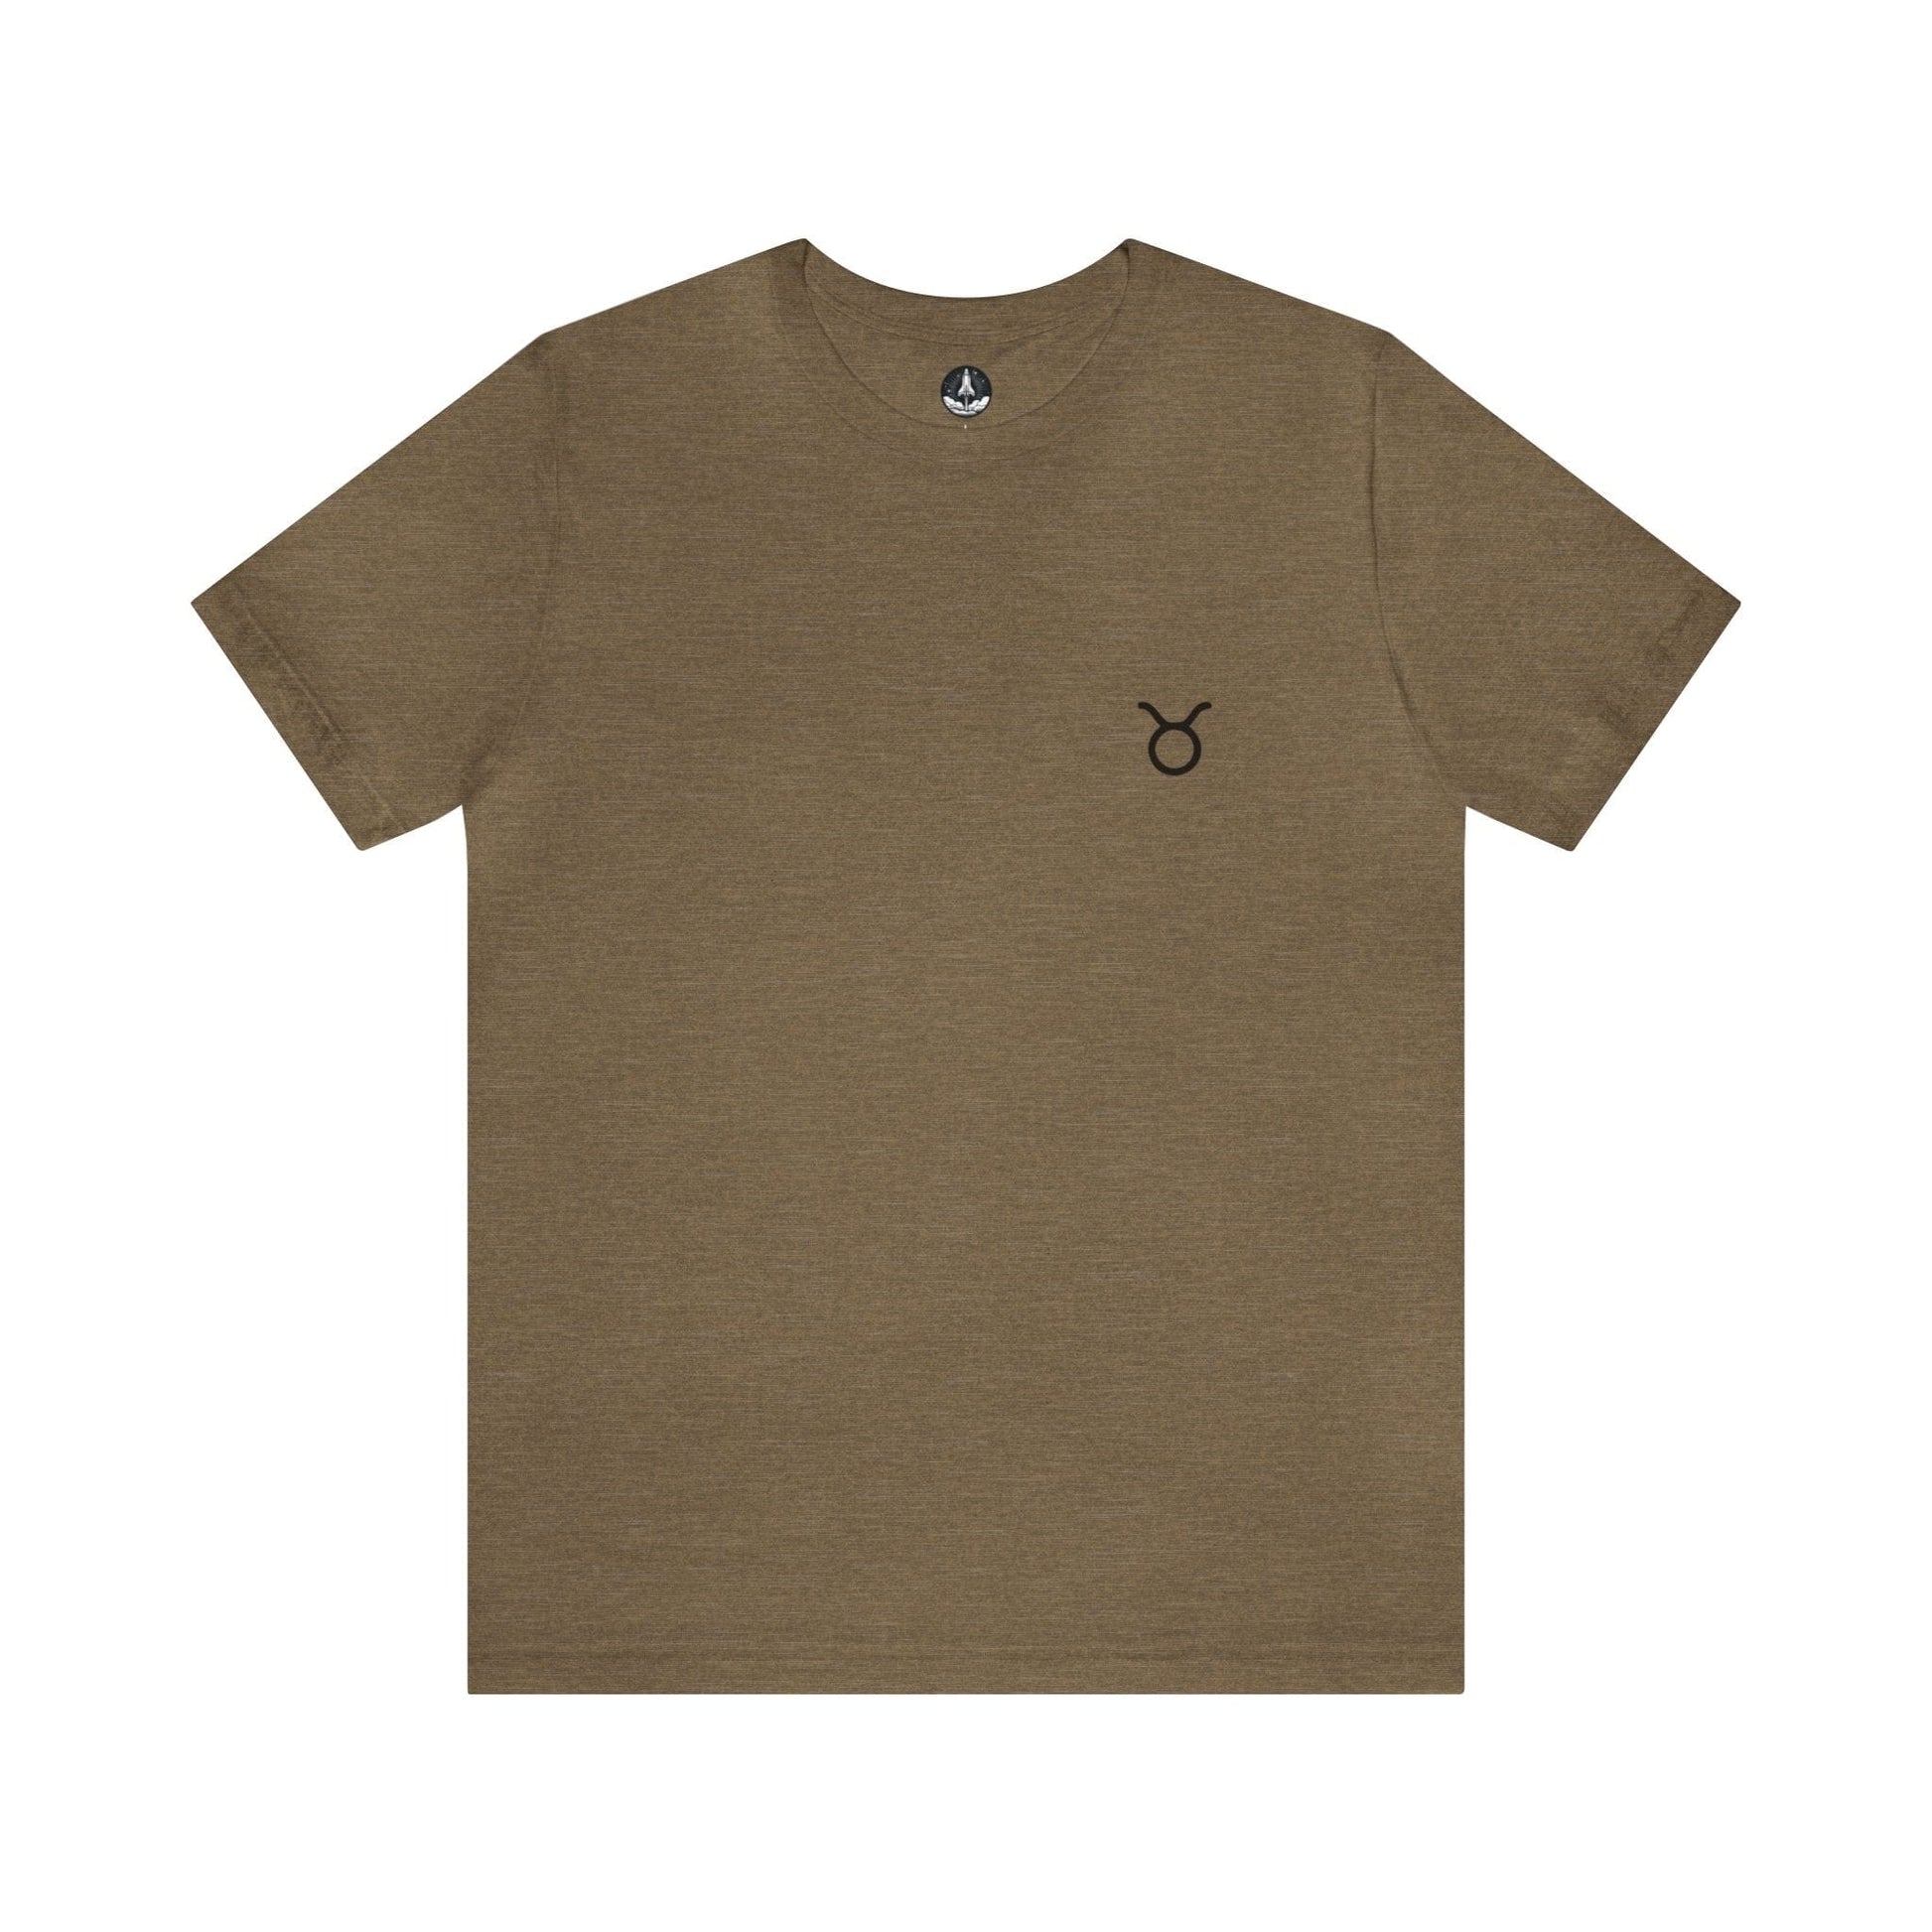 T-Shirt Heather Olive / S Taurus Zodiac Essence T-Shirt: Sophistication Meets Comfort for the Grounded Soul